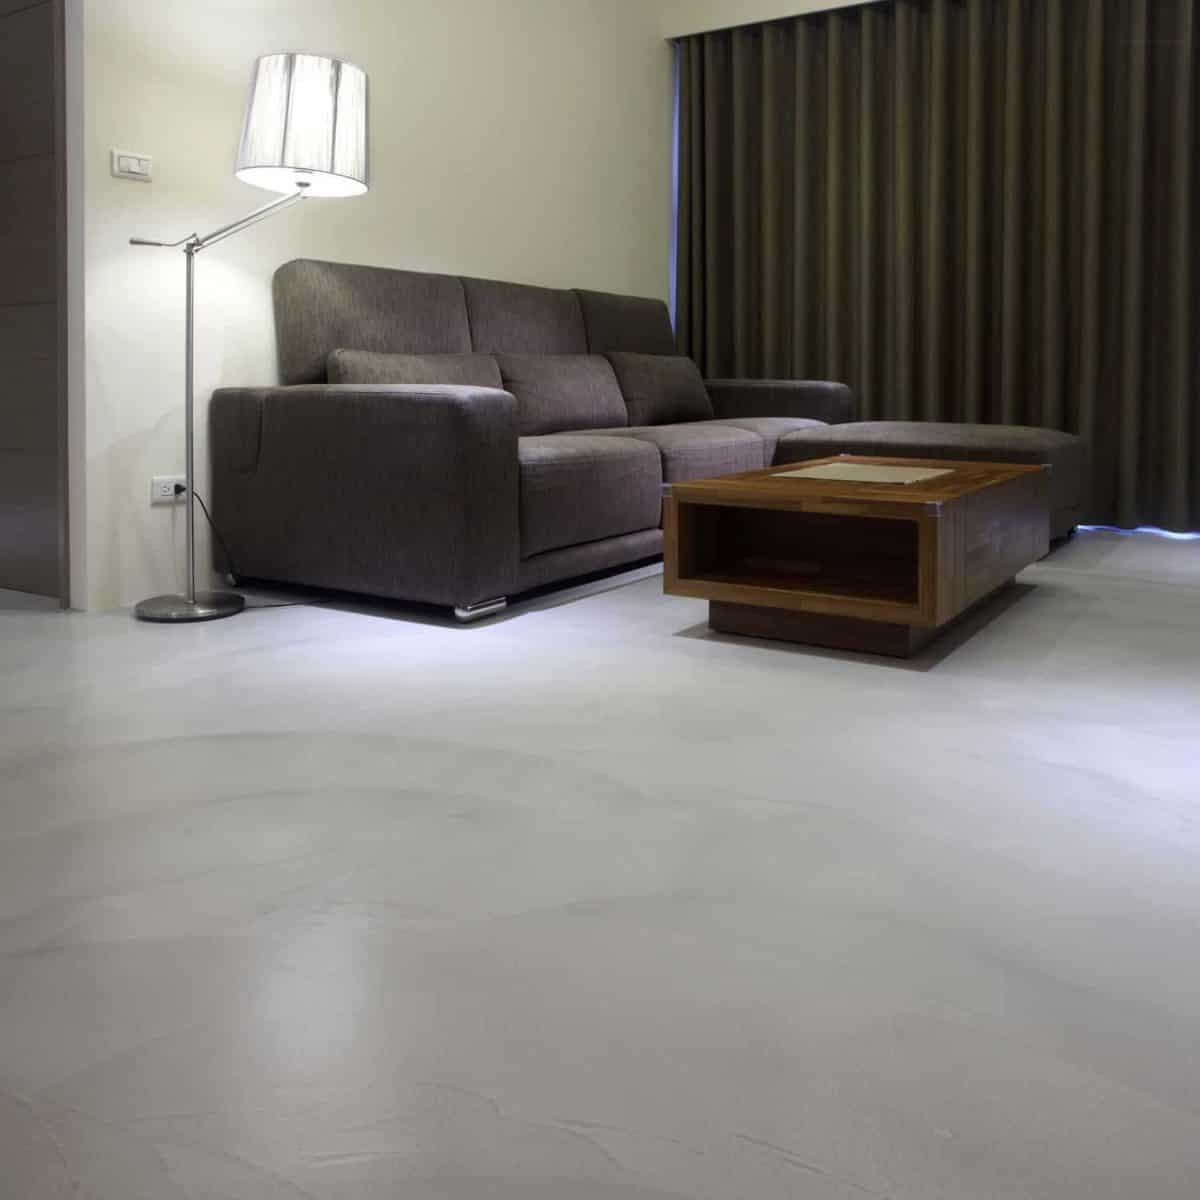 Concrete overlay finish in living room